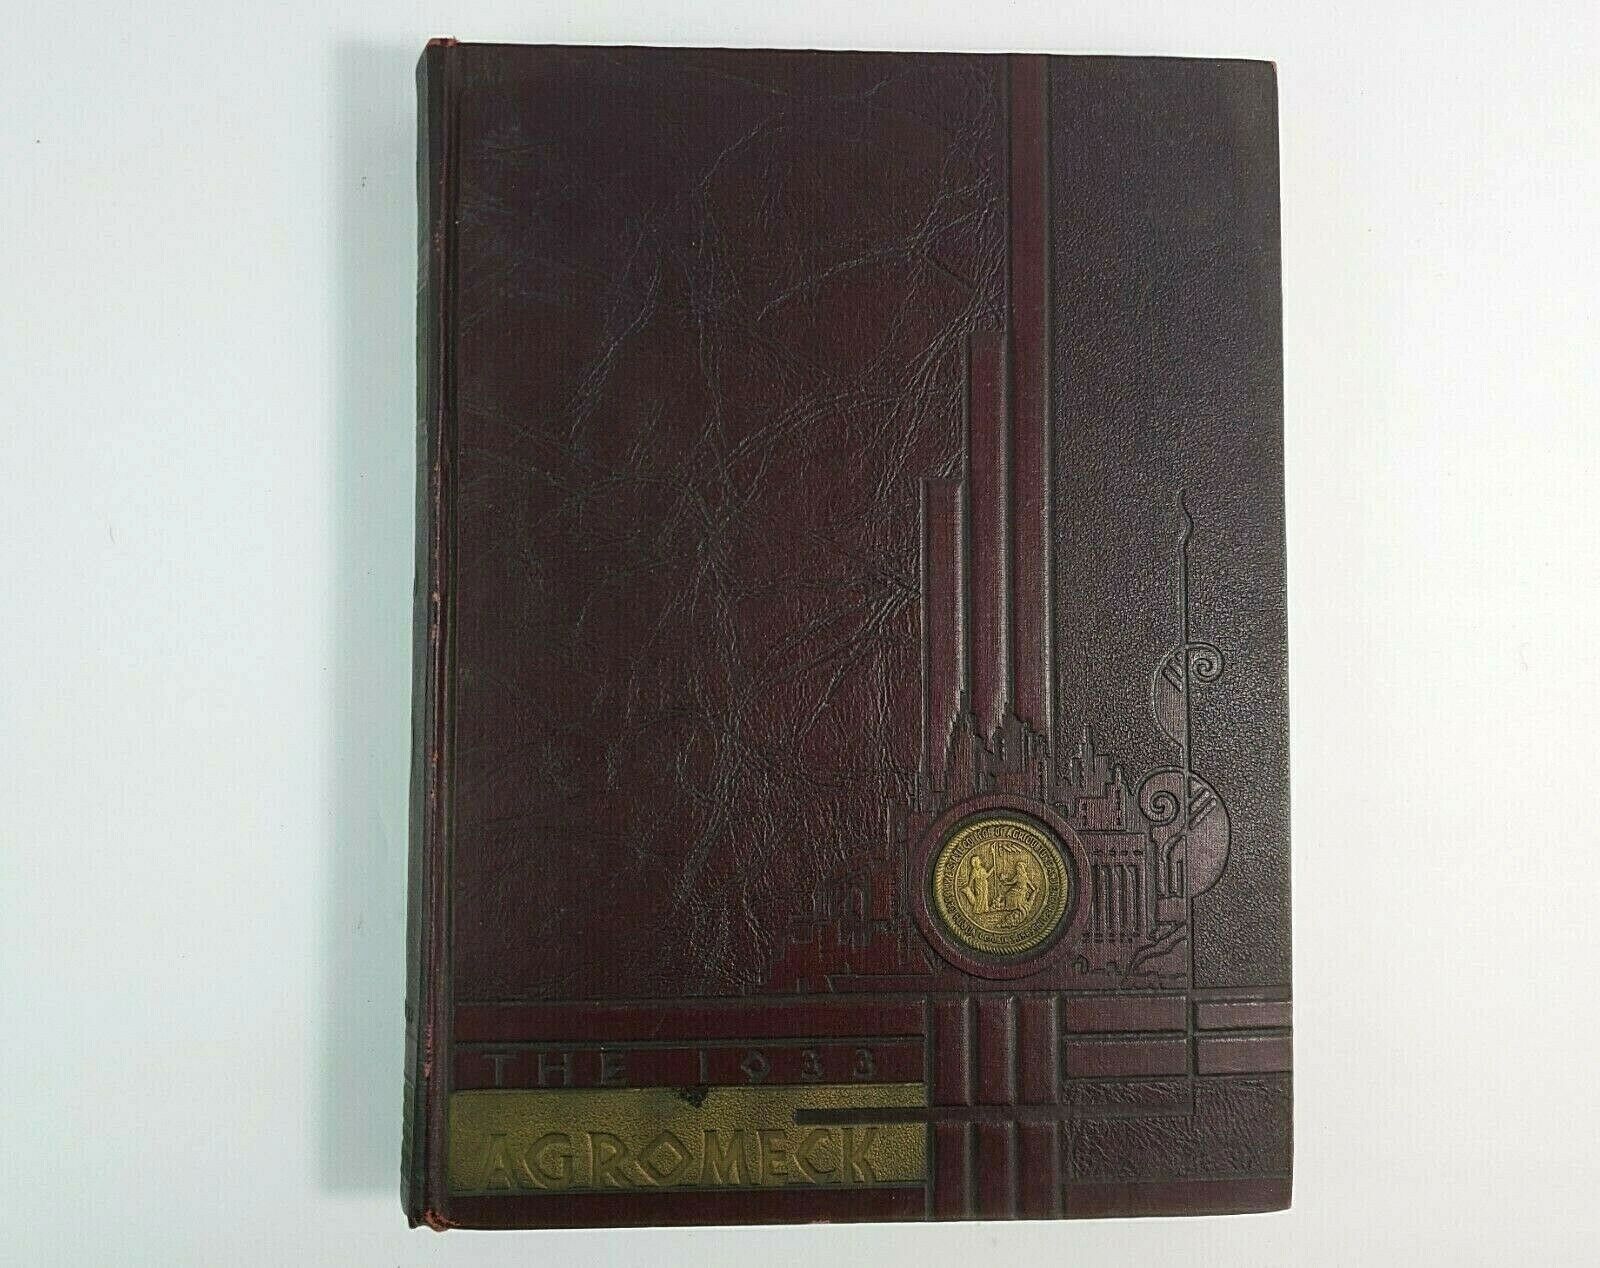 Vintage 1933 Agromeck North Carolina State College Raleigh NC Yearbook Annual 